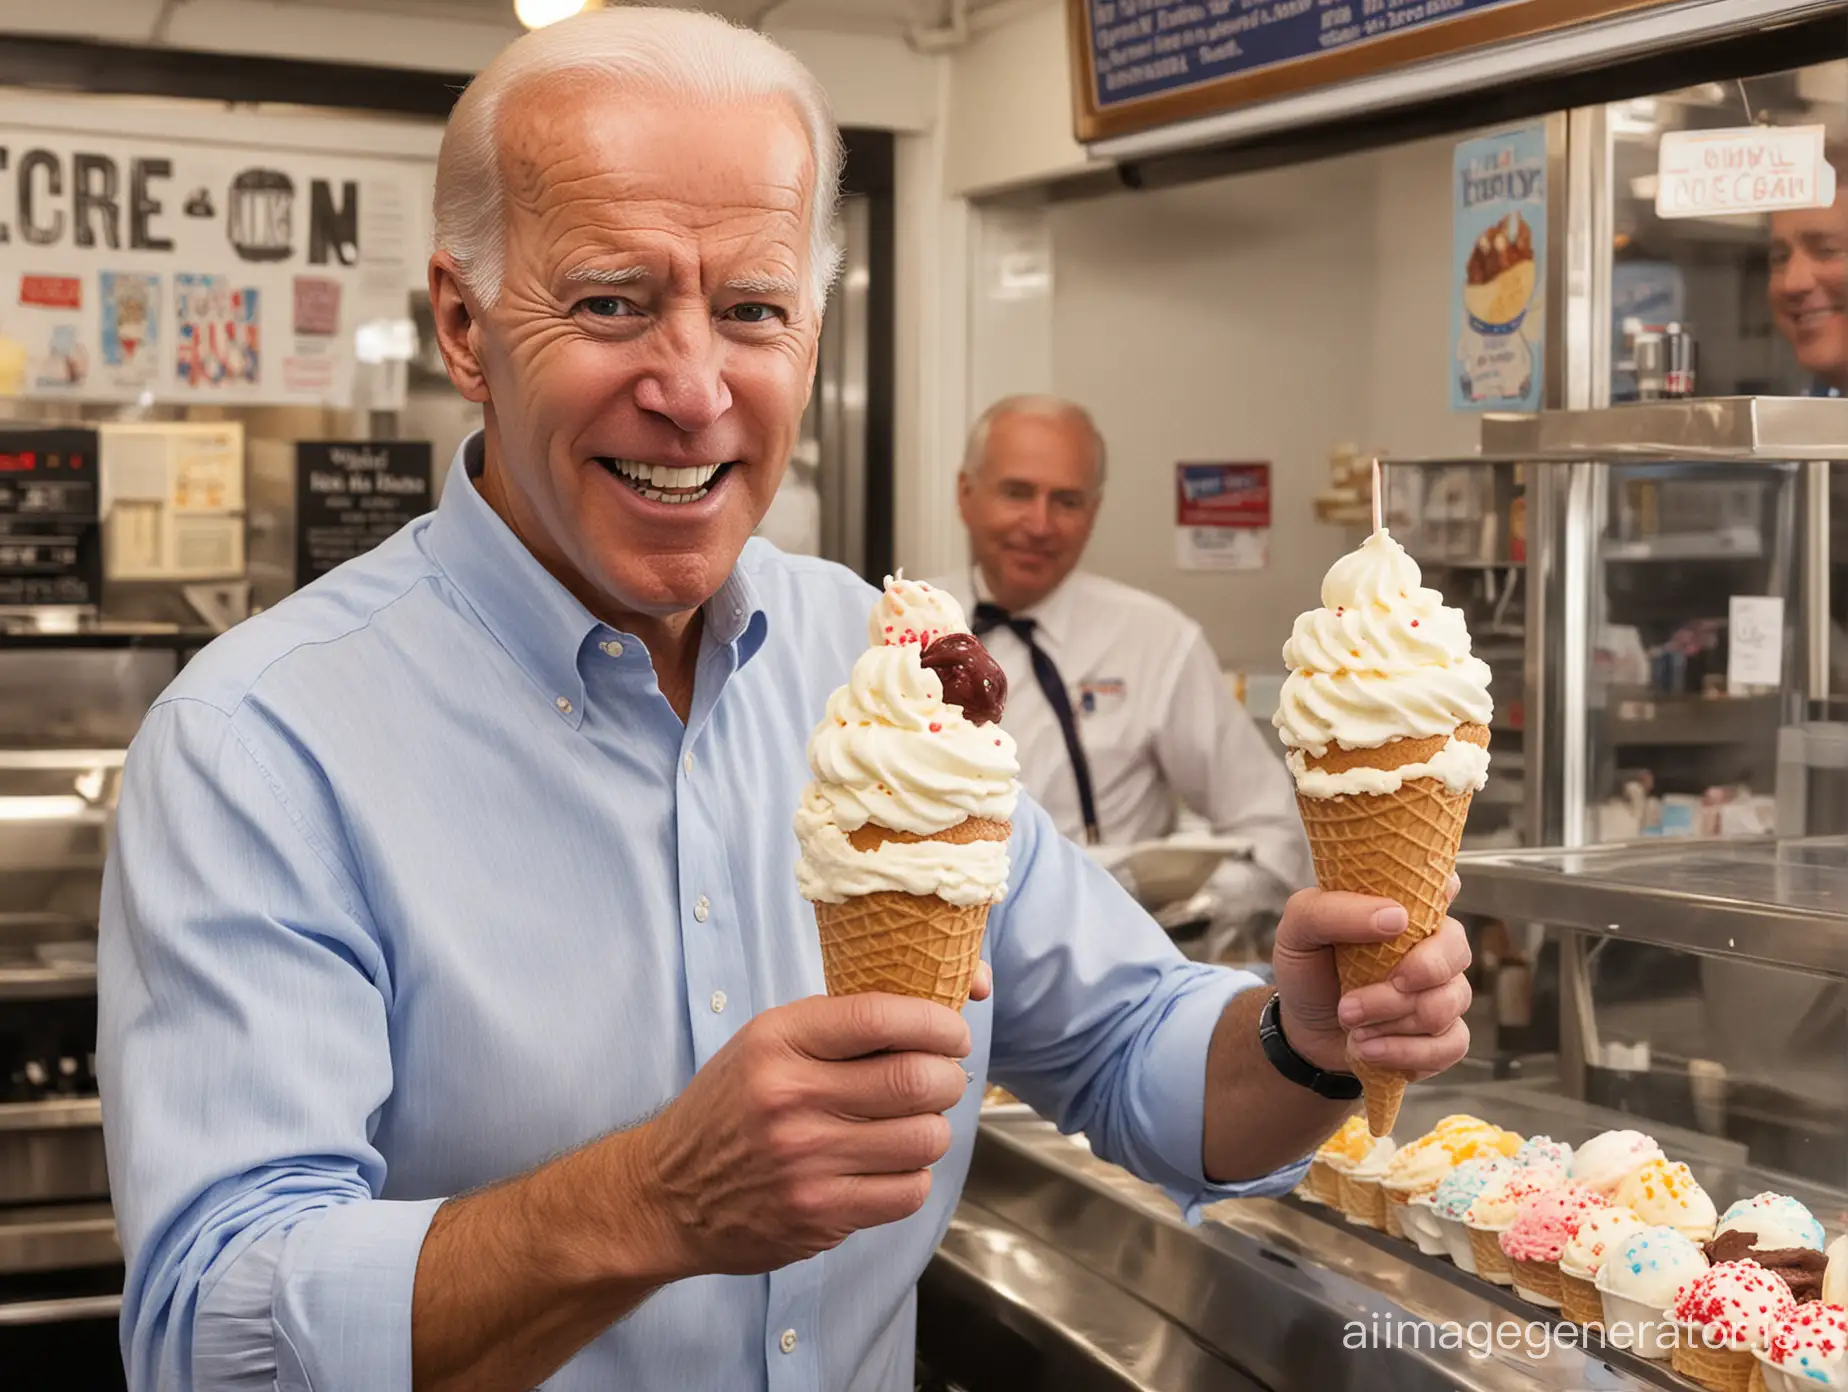 Show me Joe Biden owning and operating an ice cream shop